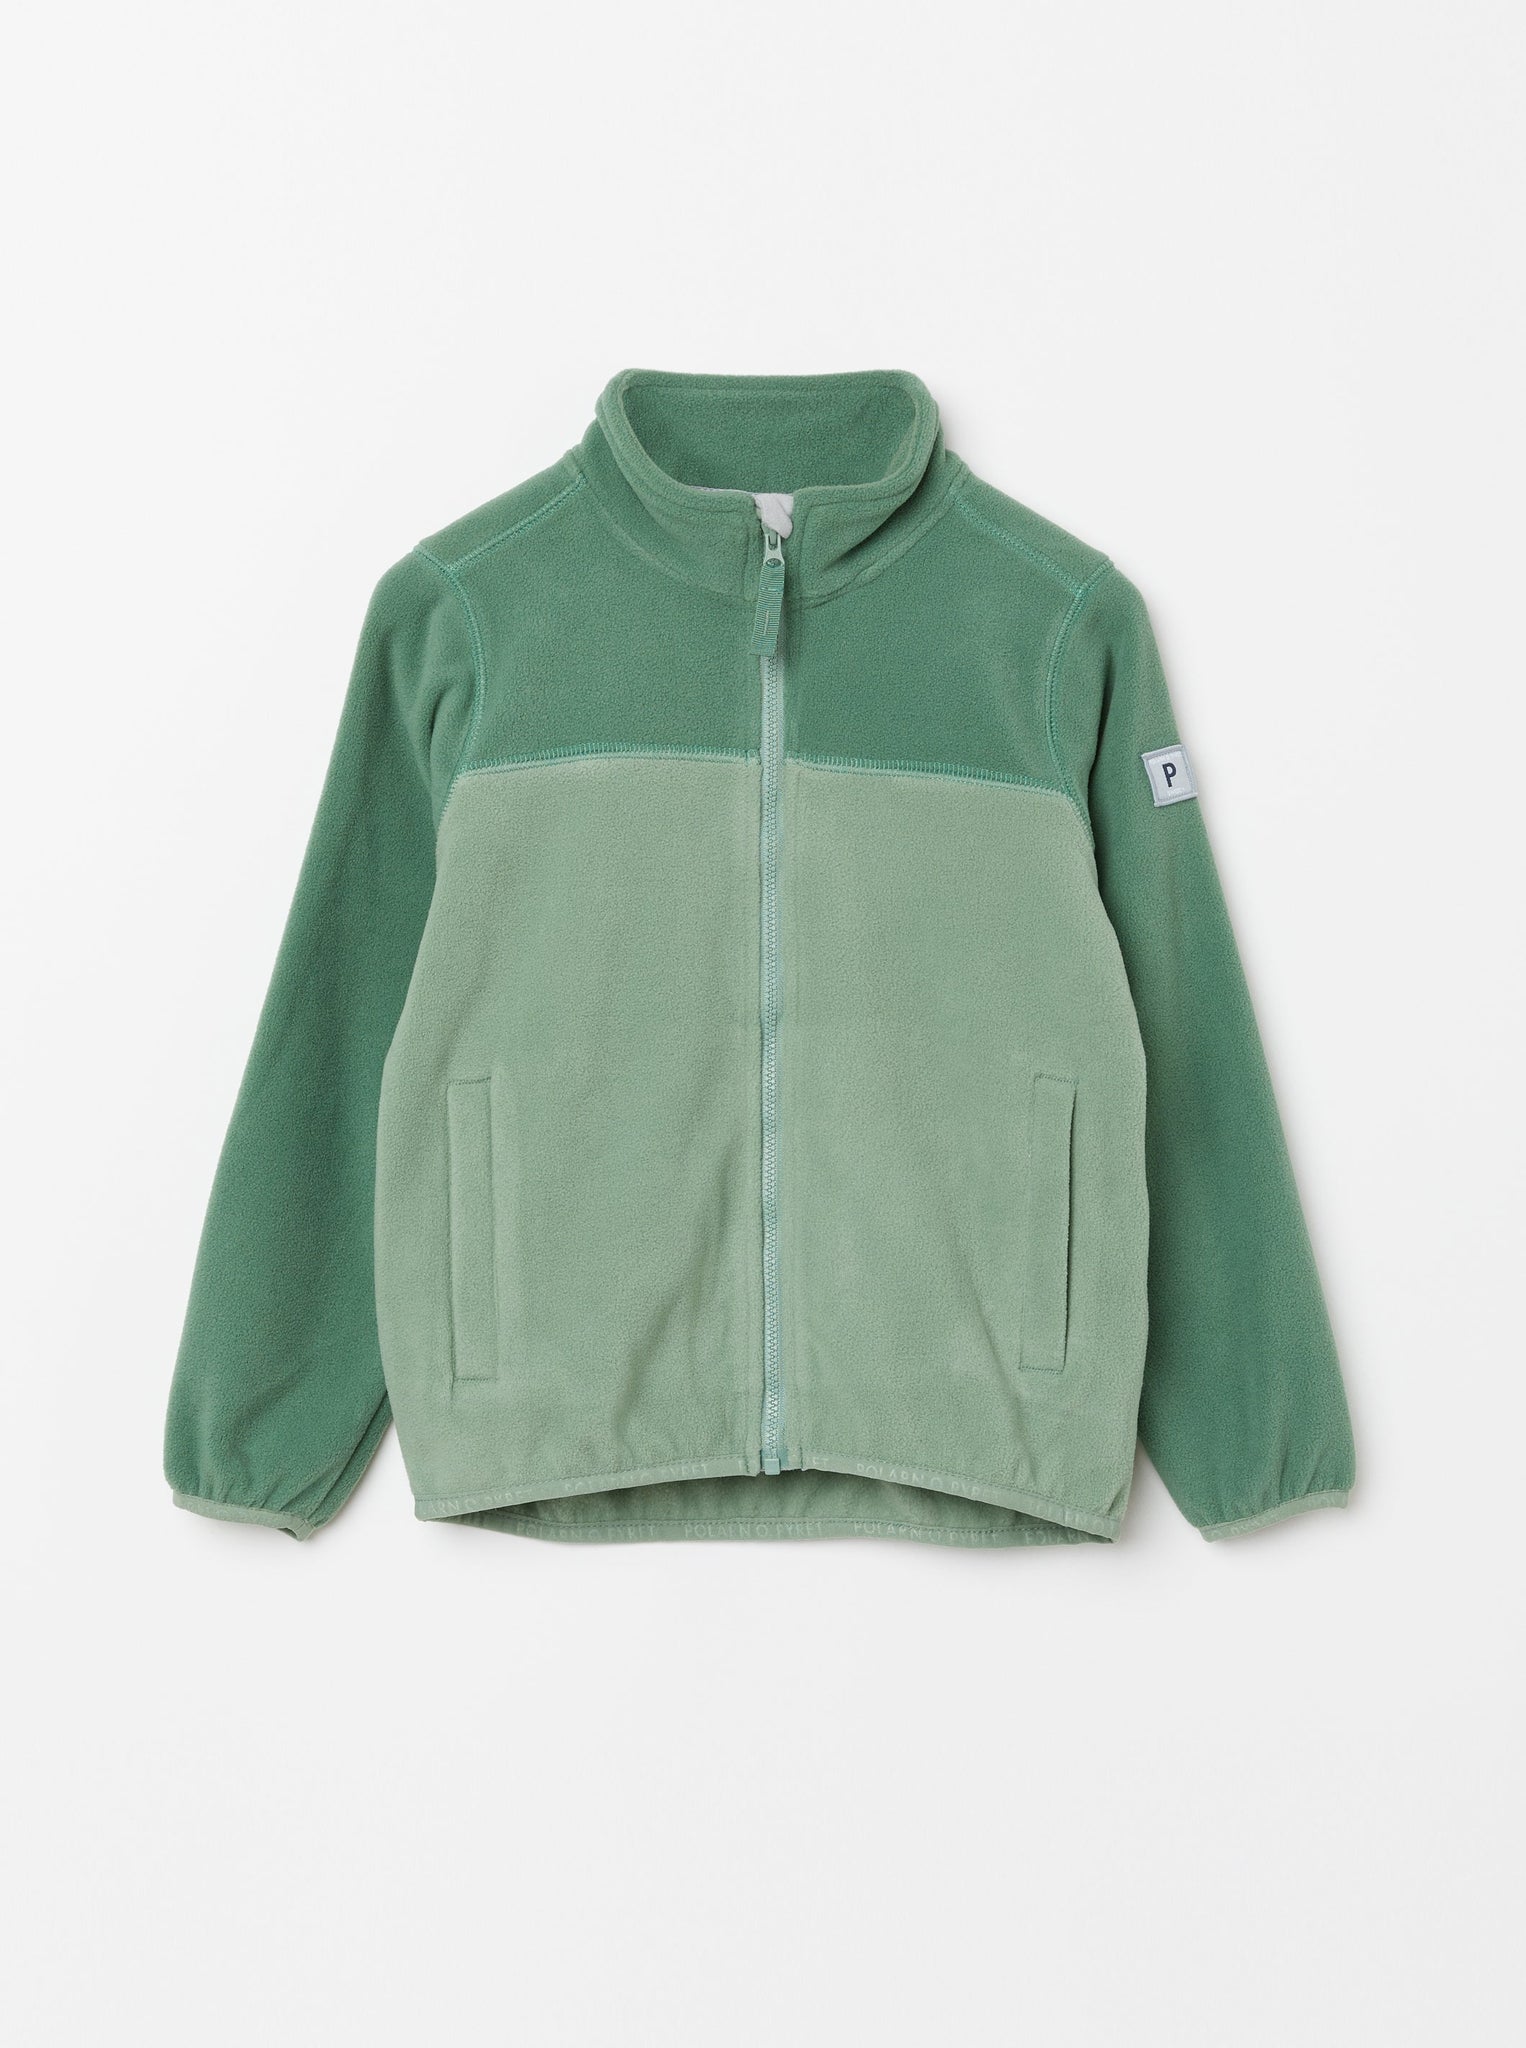 Green Kids Fleece Jacket from the Polarn O. Pyret kidswear collection. Made using ethically sourced materials.